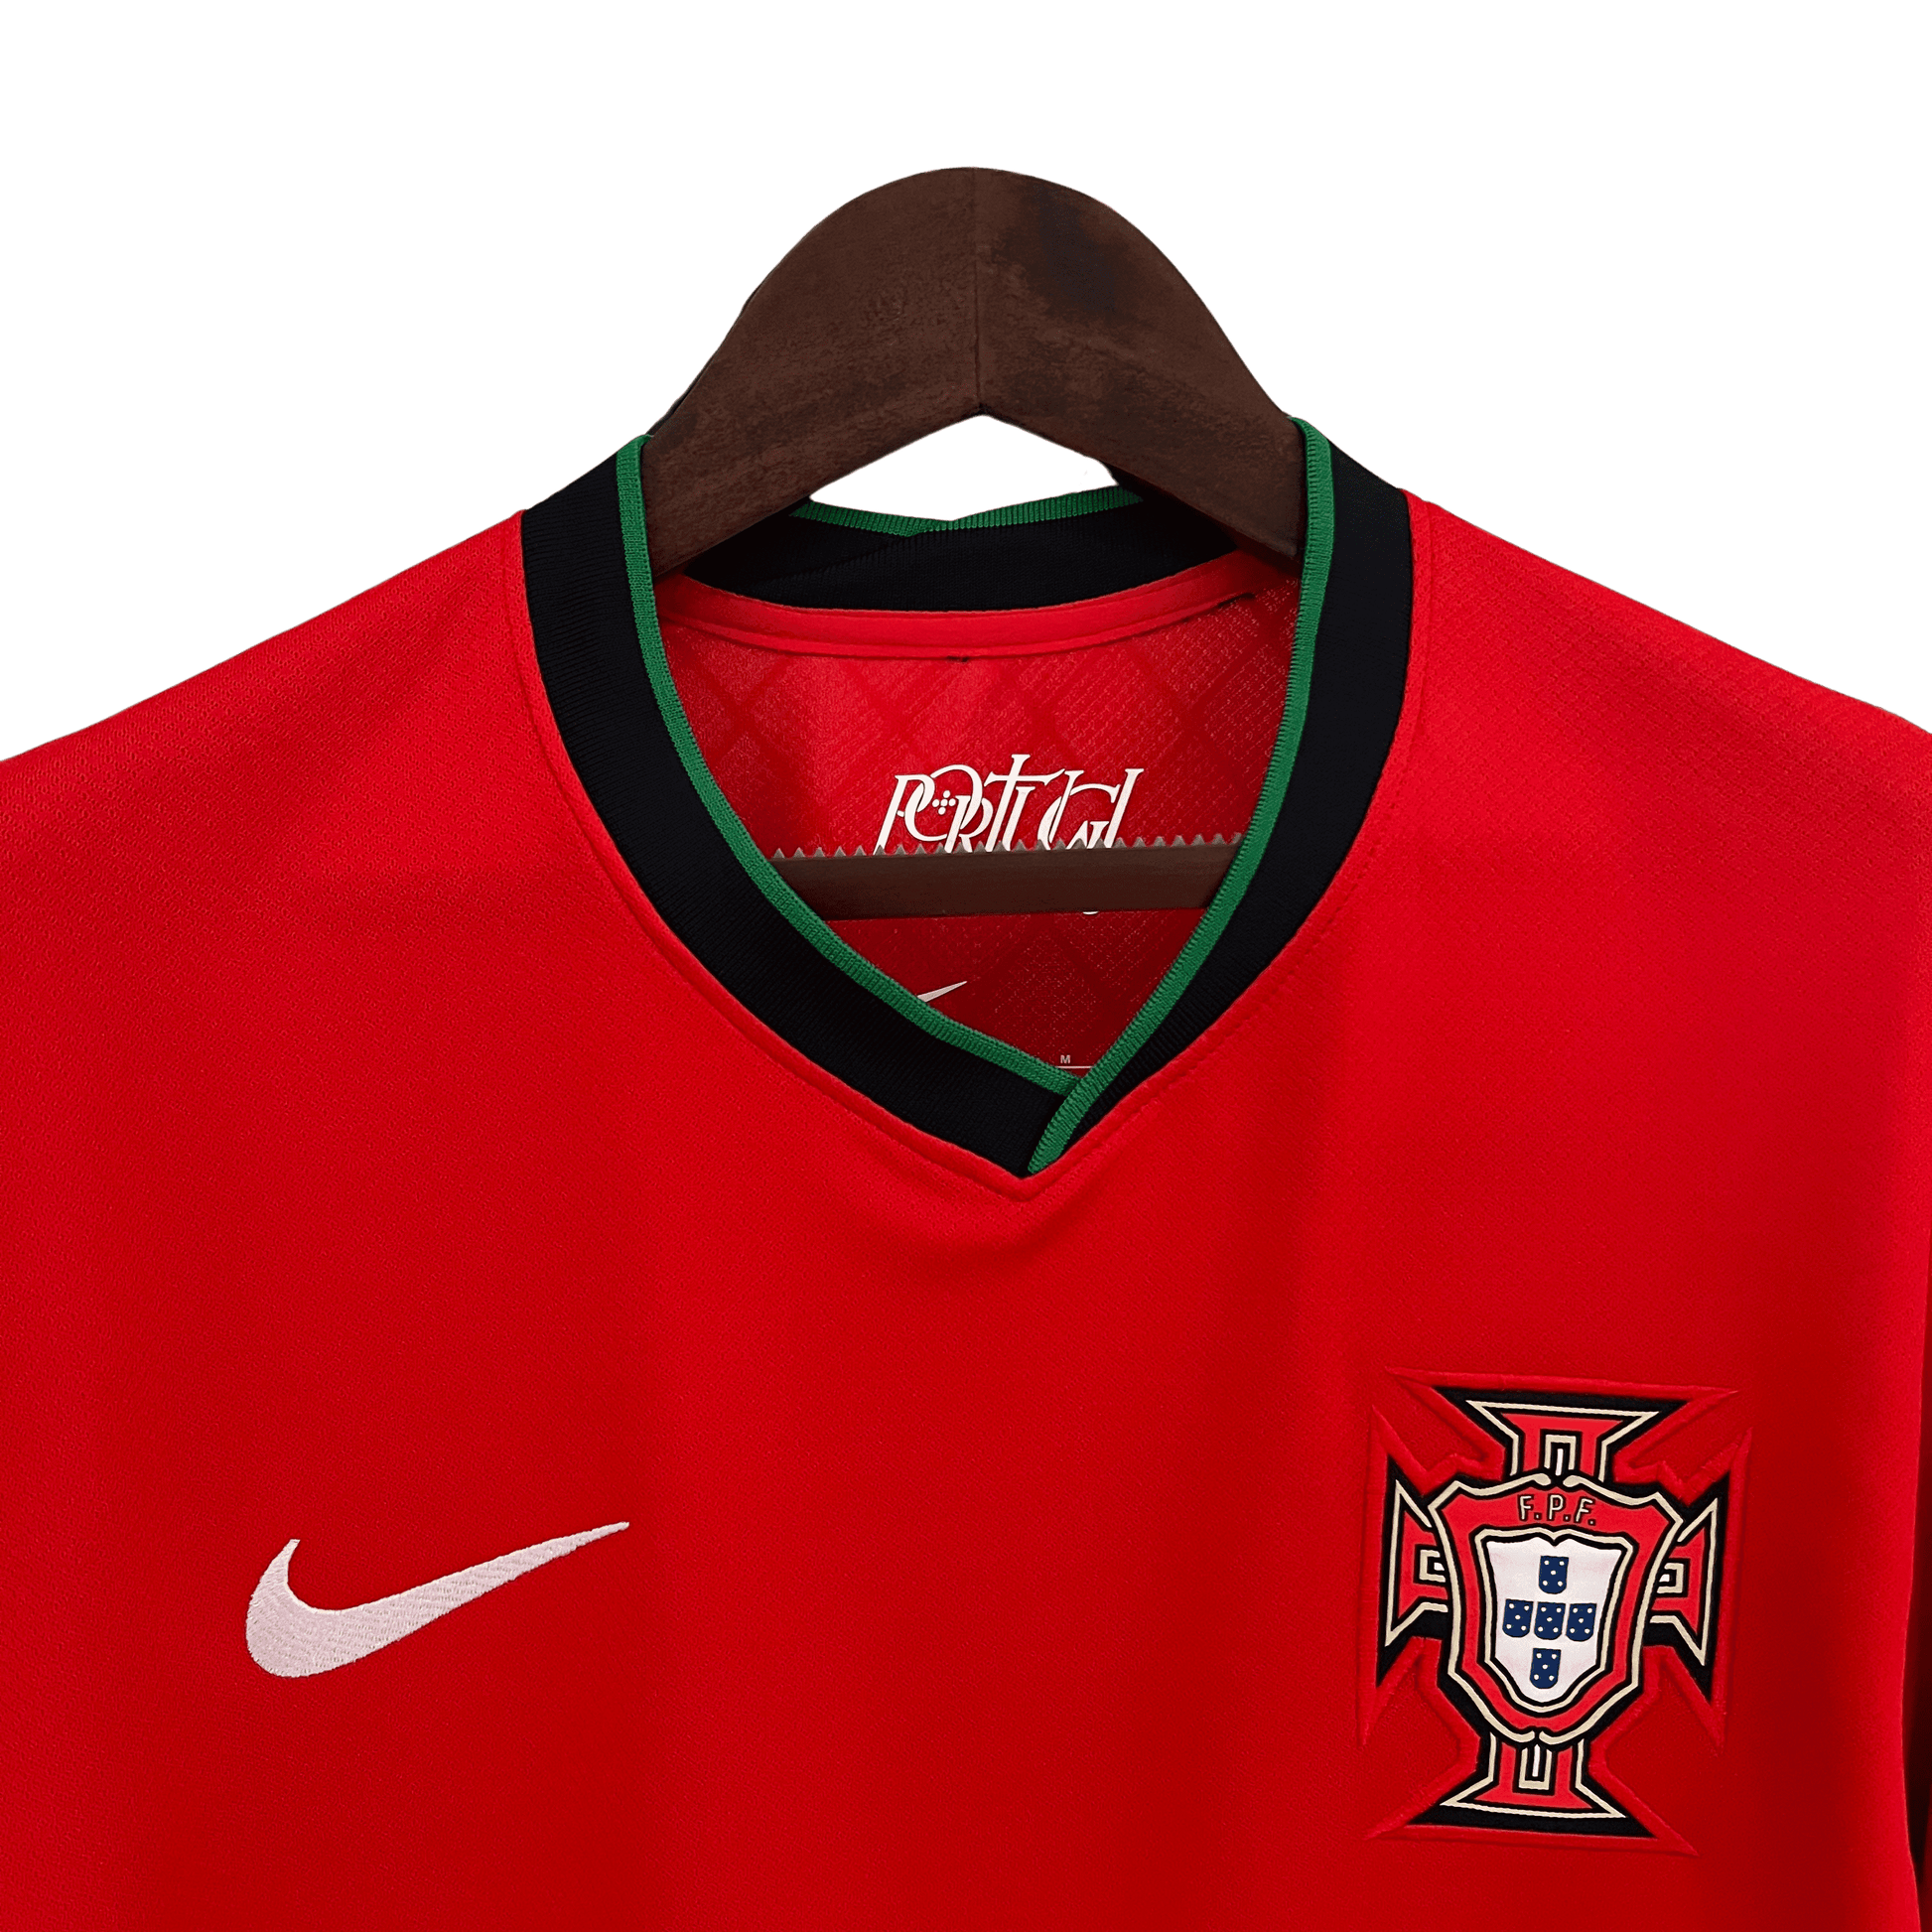 Portugal EURO 2024 Home kit – Fan Version - Front